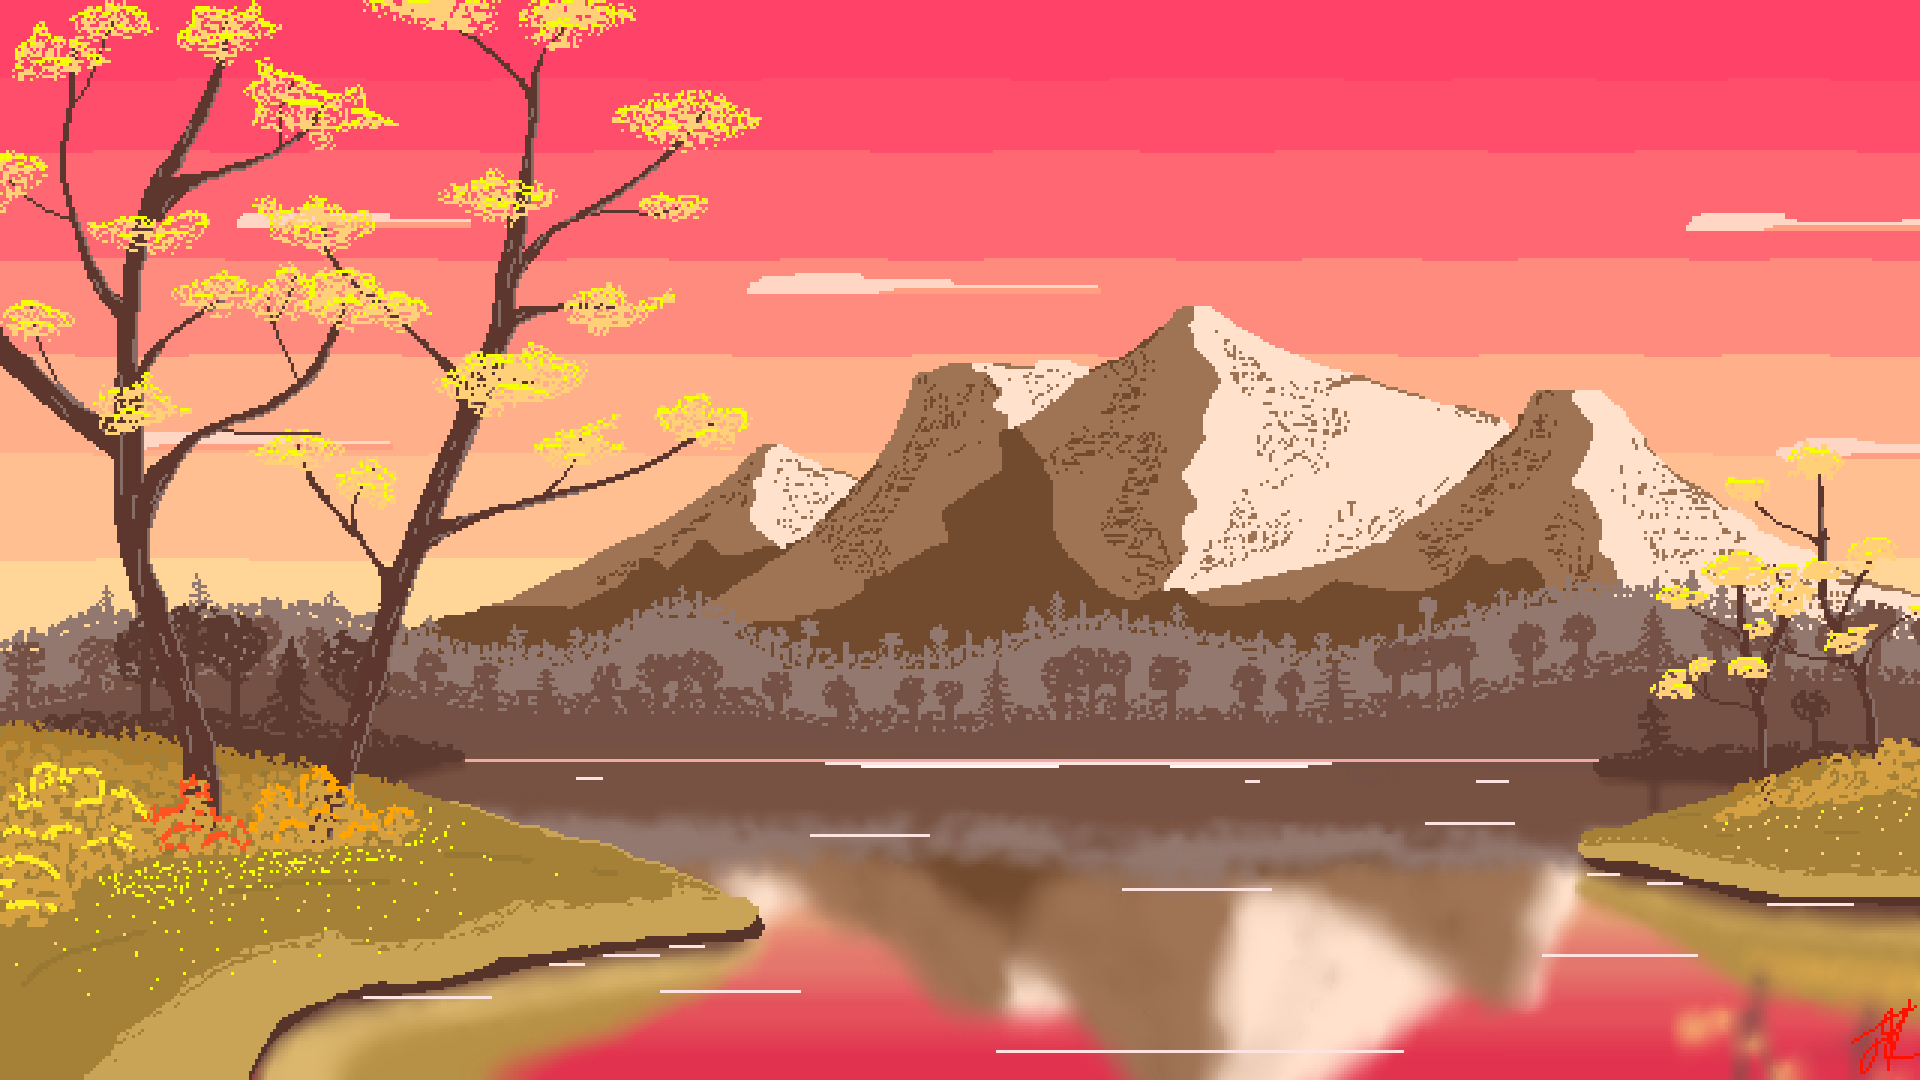 Wallpaper / nature, landscape, pixel art, pixelated, pixels, mountains, Wavestormed, trees, spring, forest, lake, reflection, pink clouds free download